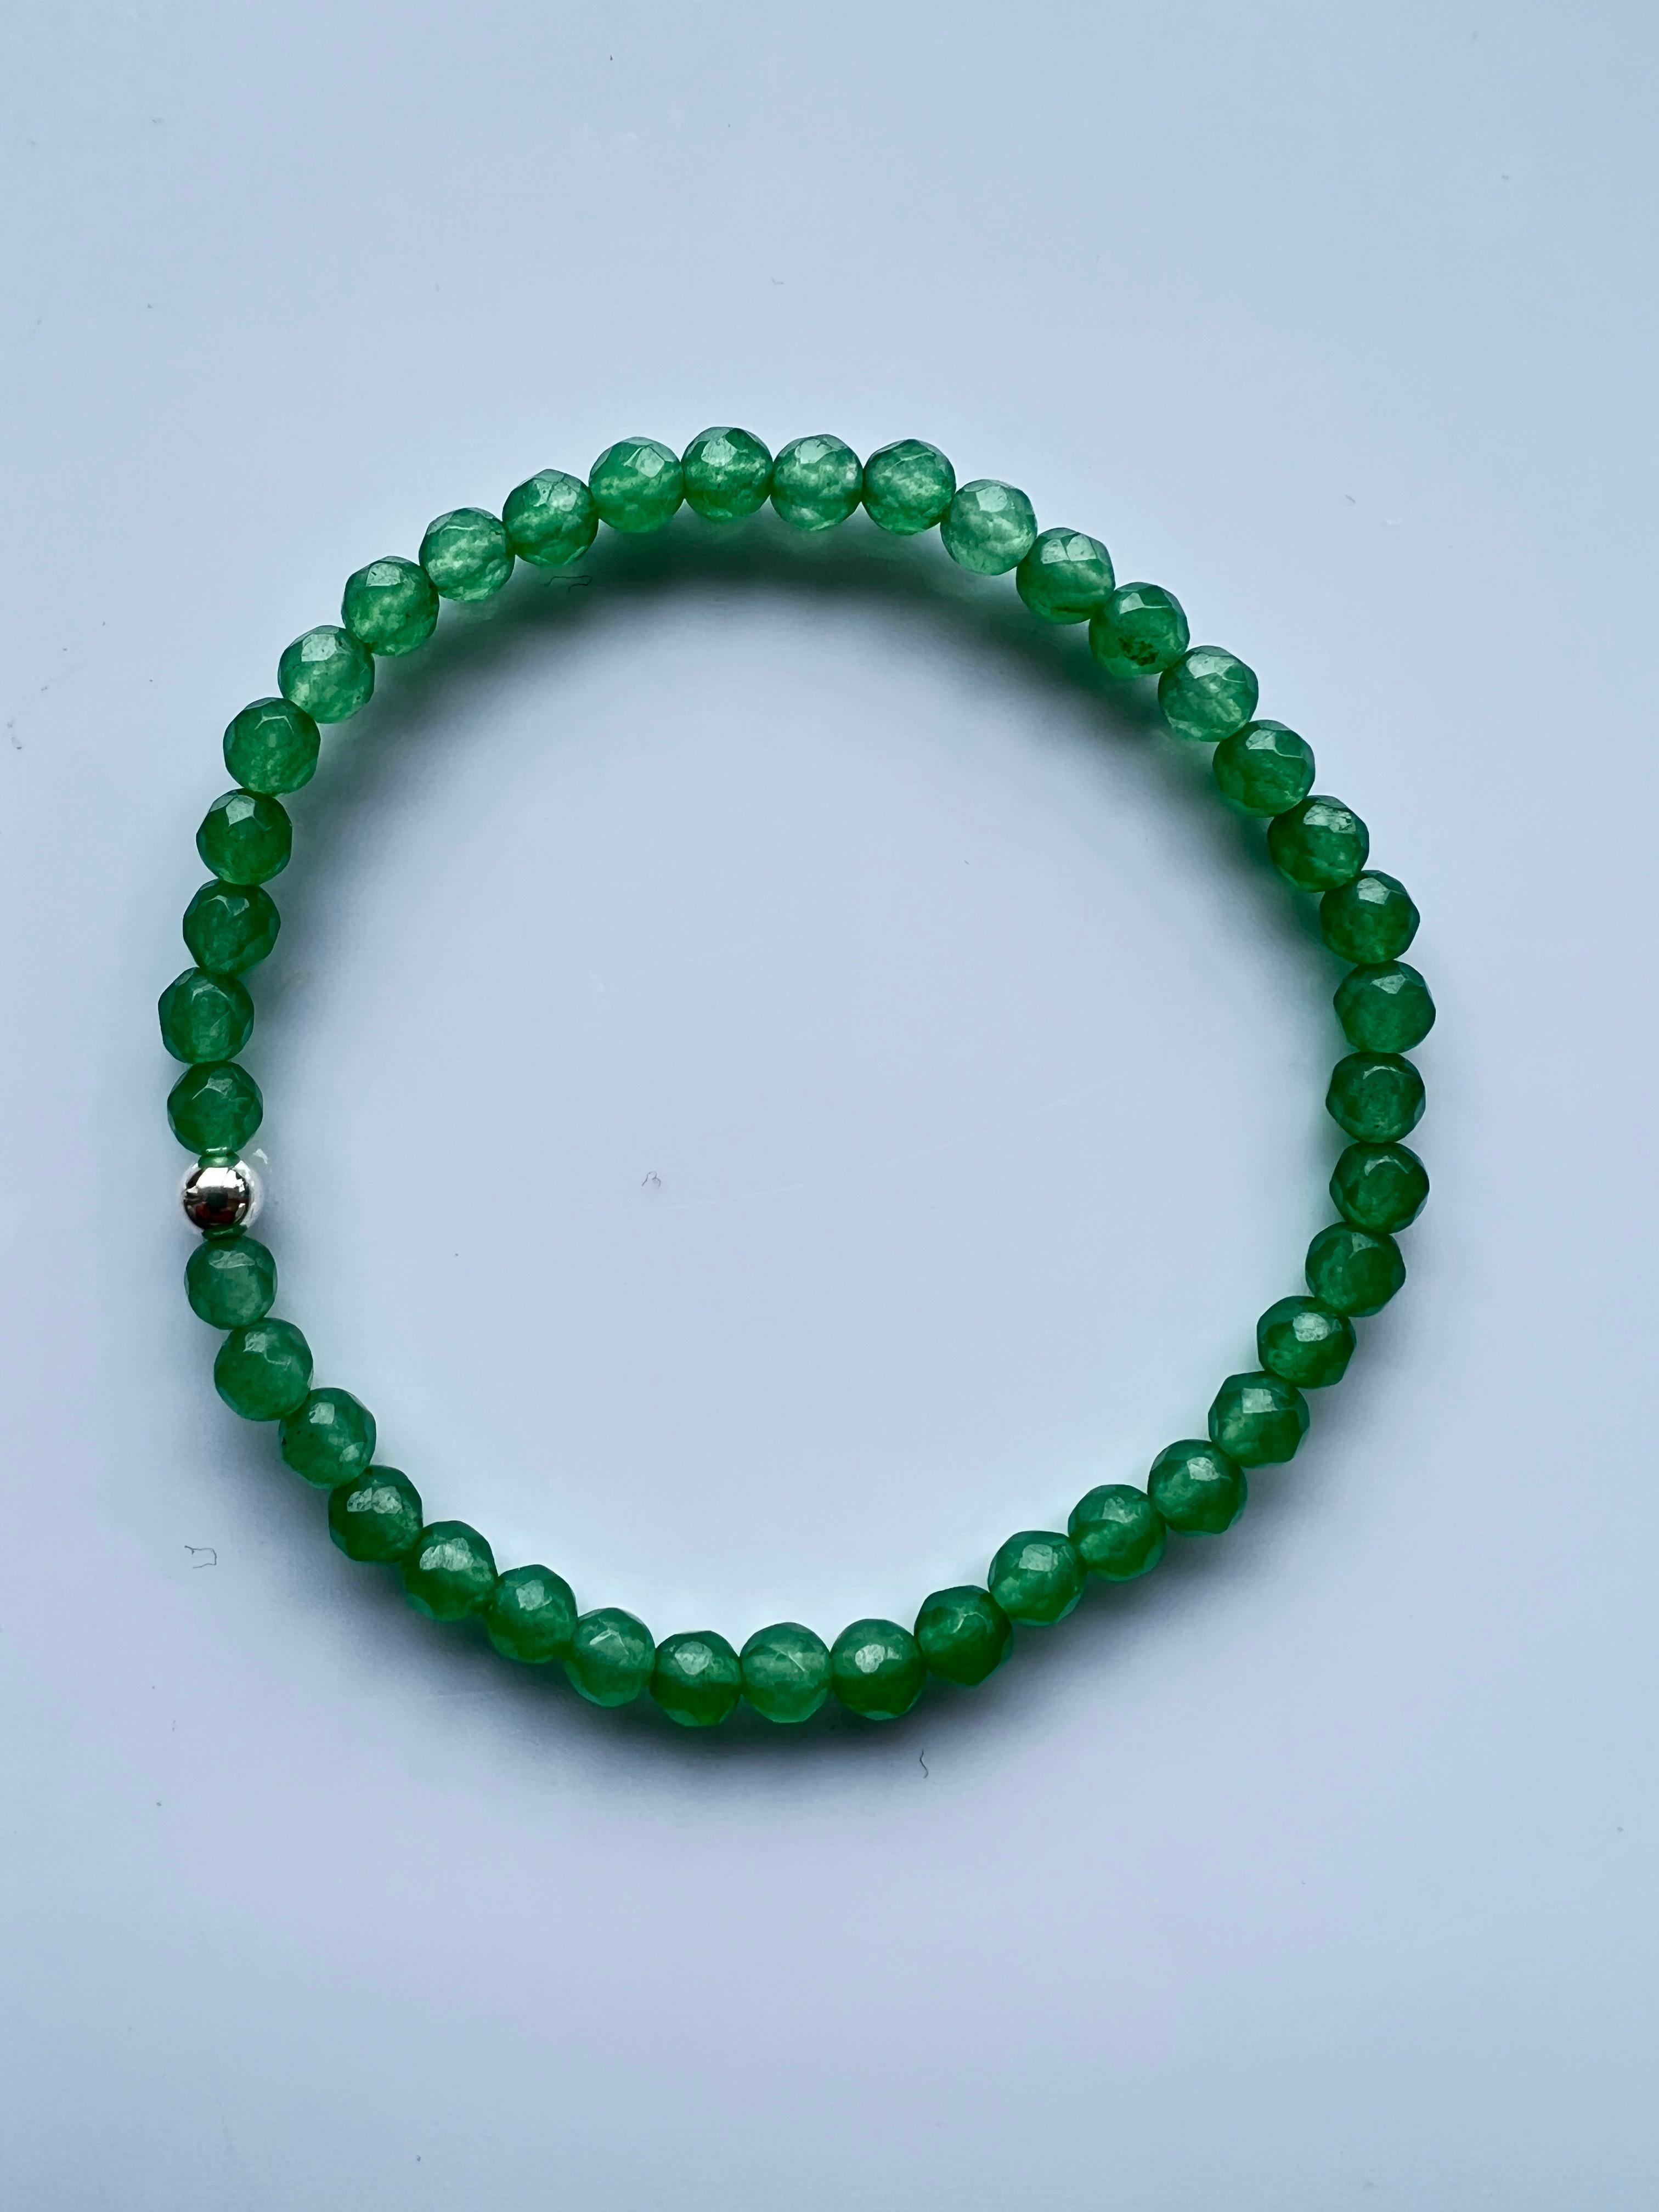 Green Gem Heart Chakra Beaded Bracelet Natural Semi Precious Gem Silver J Dauphin

Introducing the J Dauphin Green Stone Beaded Bracelet, an exceptional piece of jewelry radiating a serene ambiance and profound spiritual significance. Each bracelet